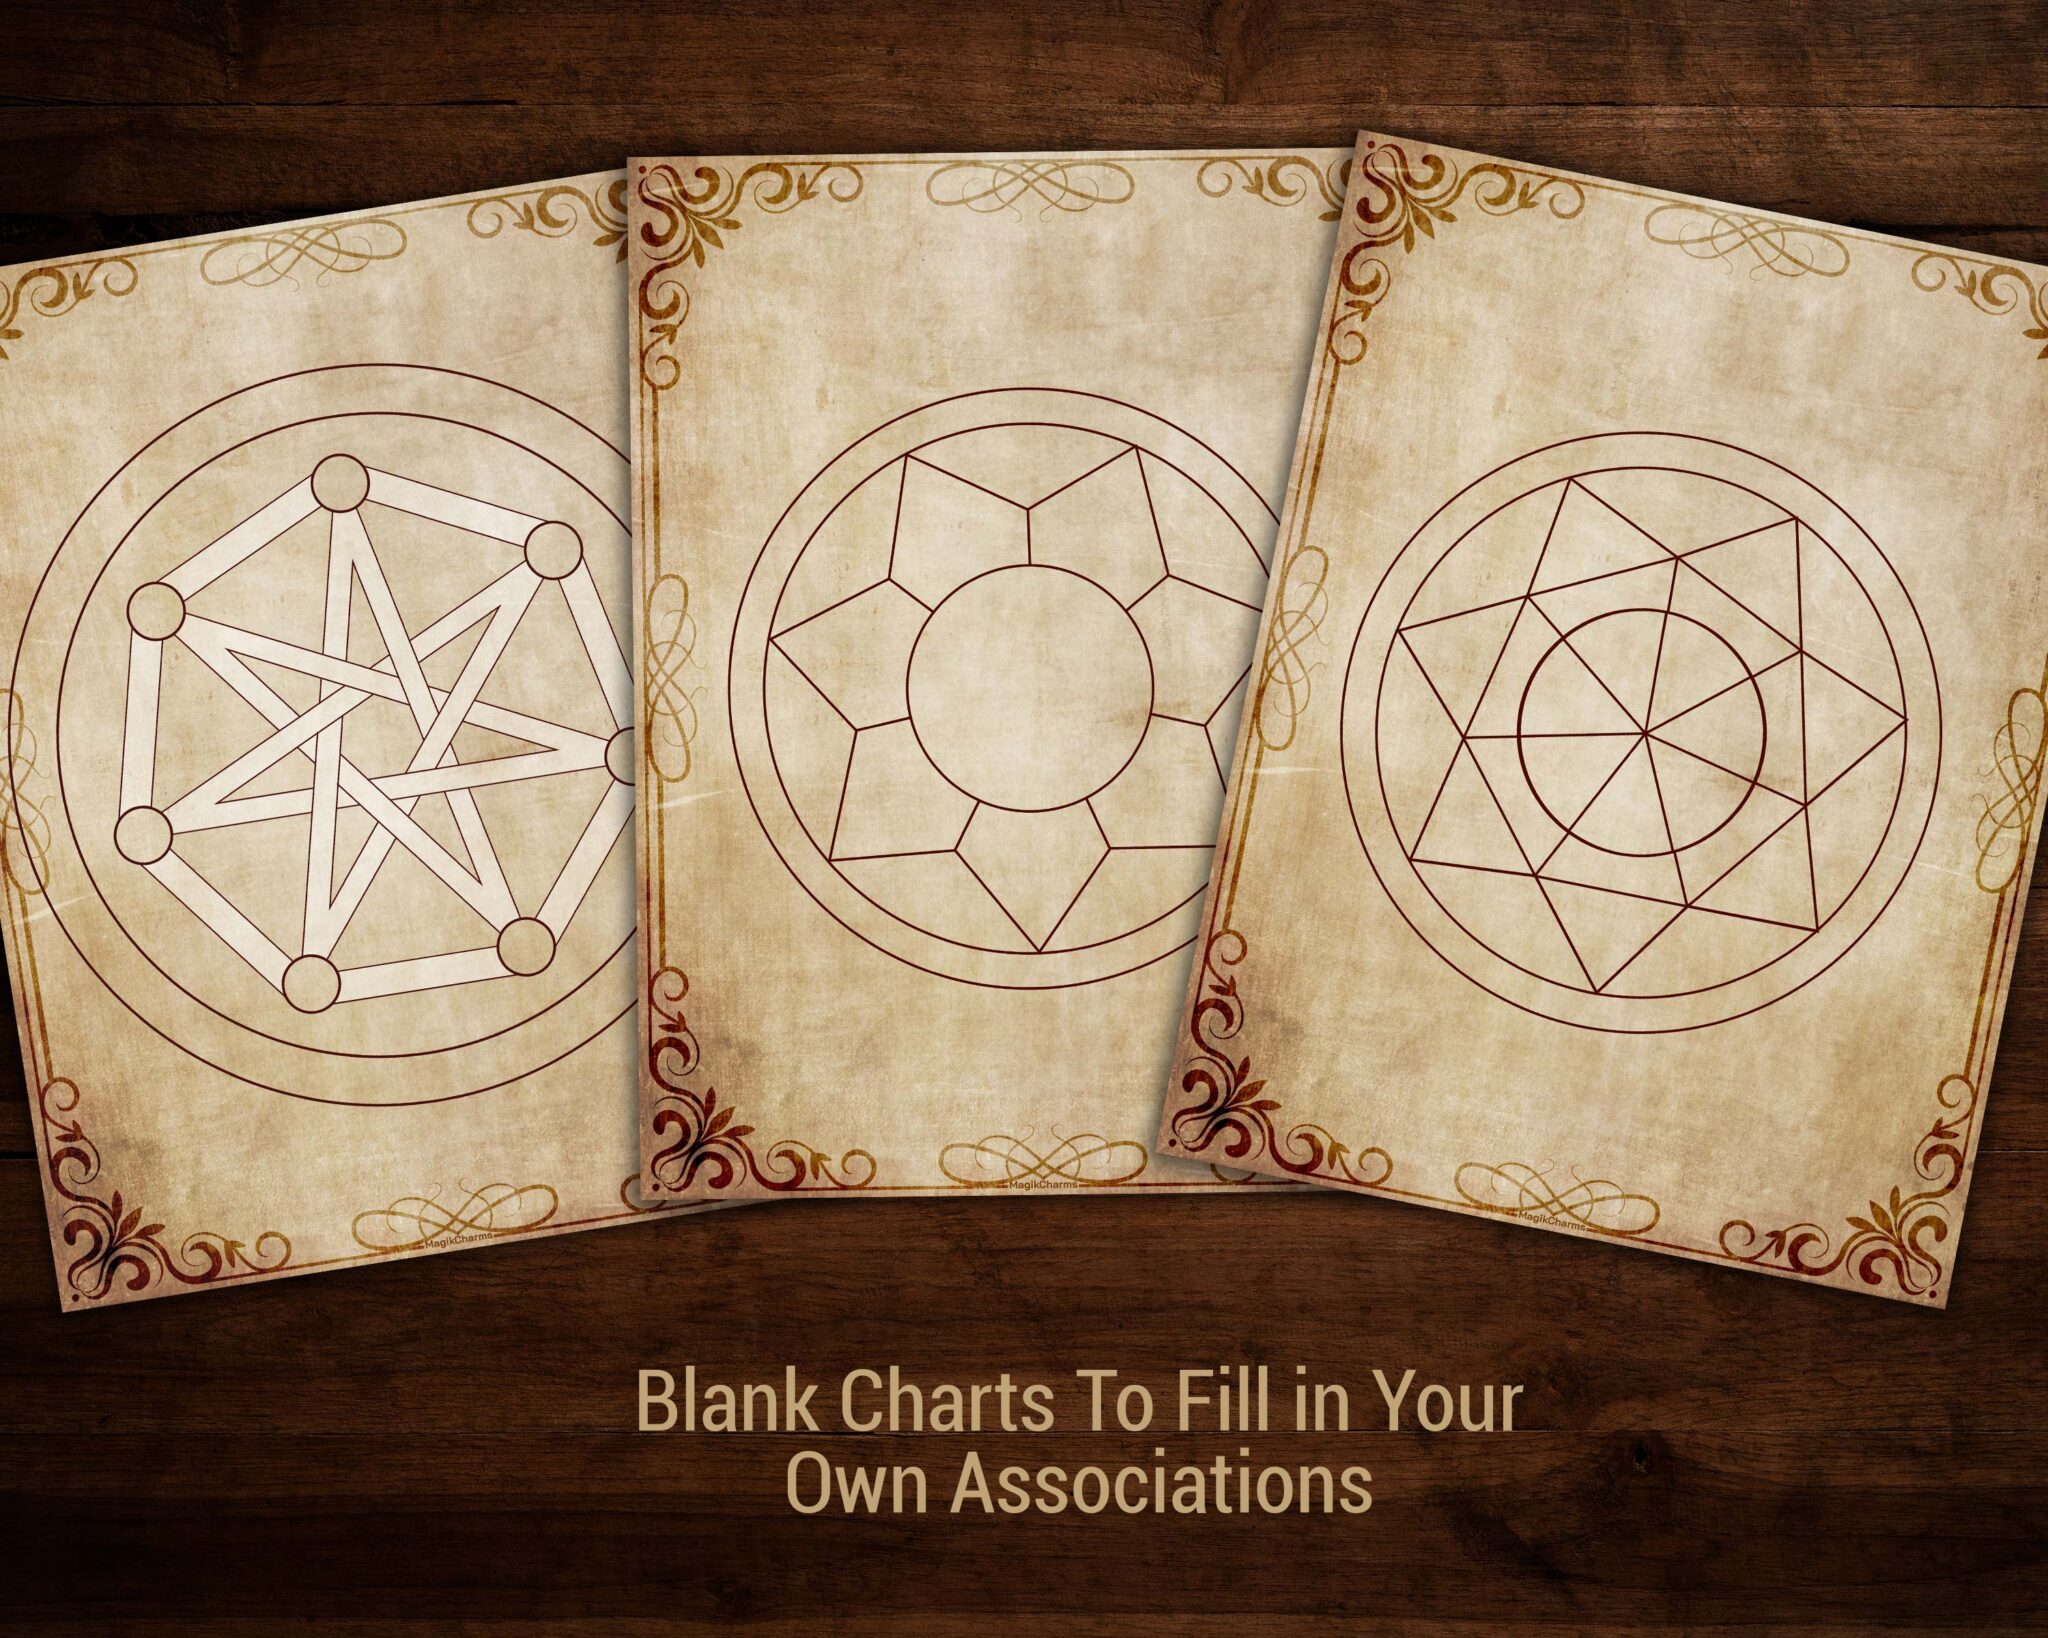 Blank ancient charts for your personal witchcraft associations and properties.